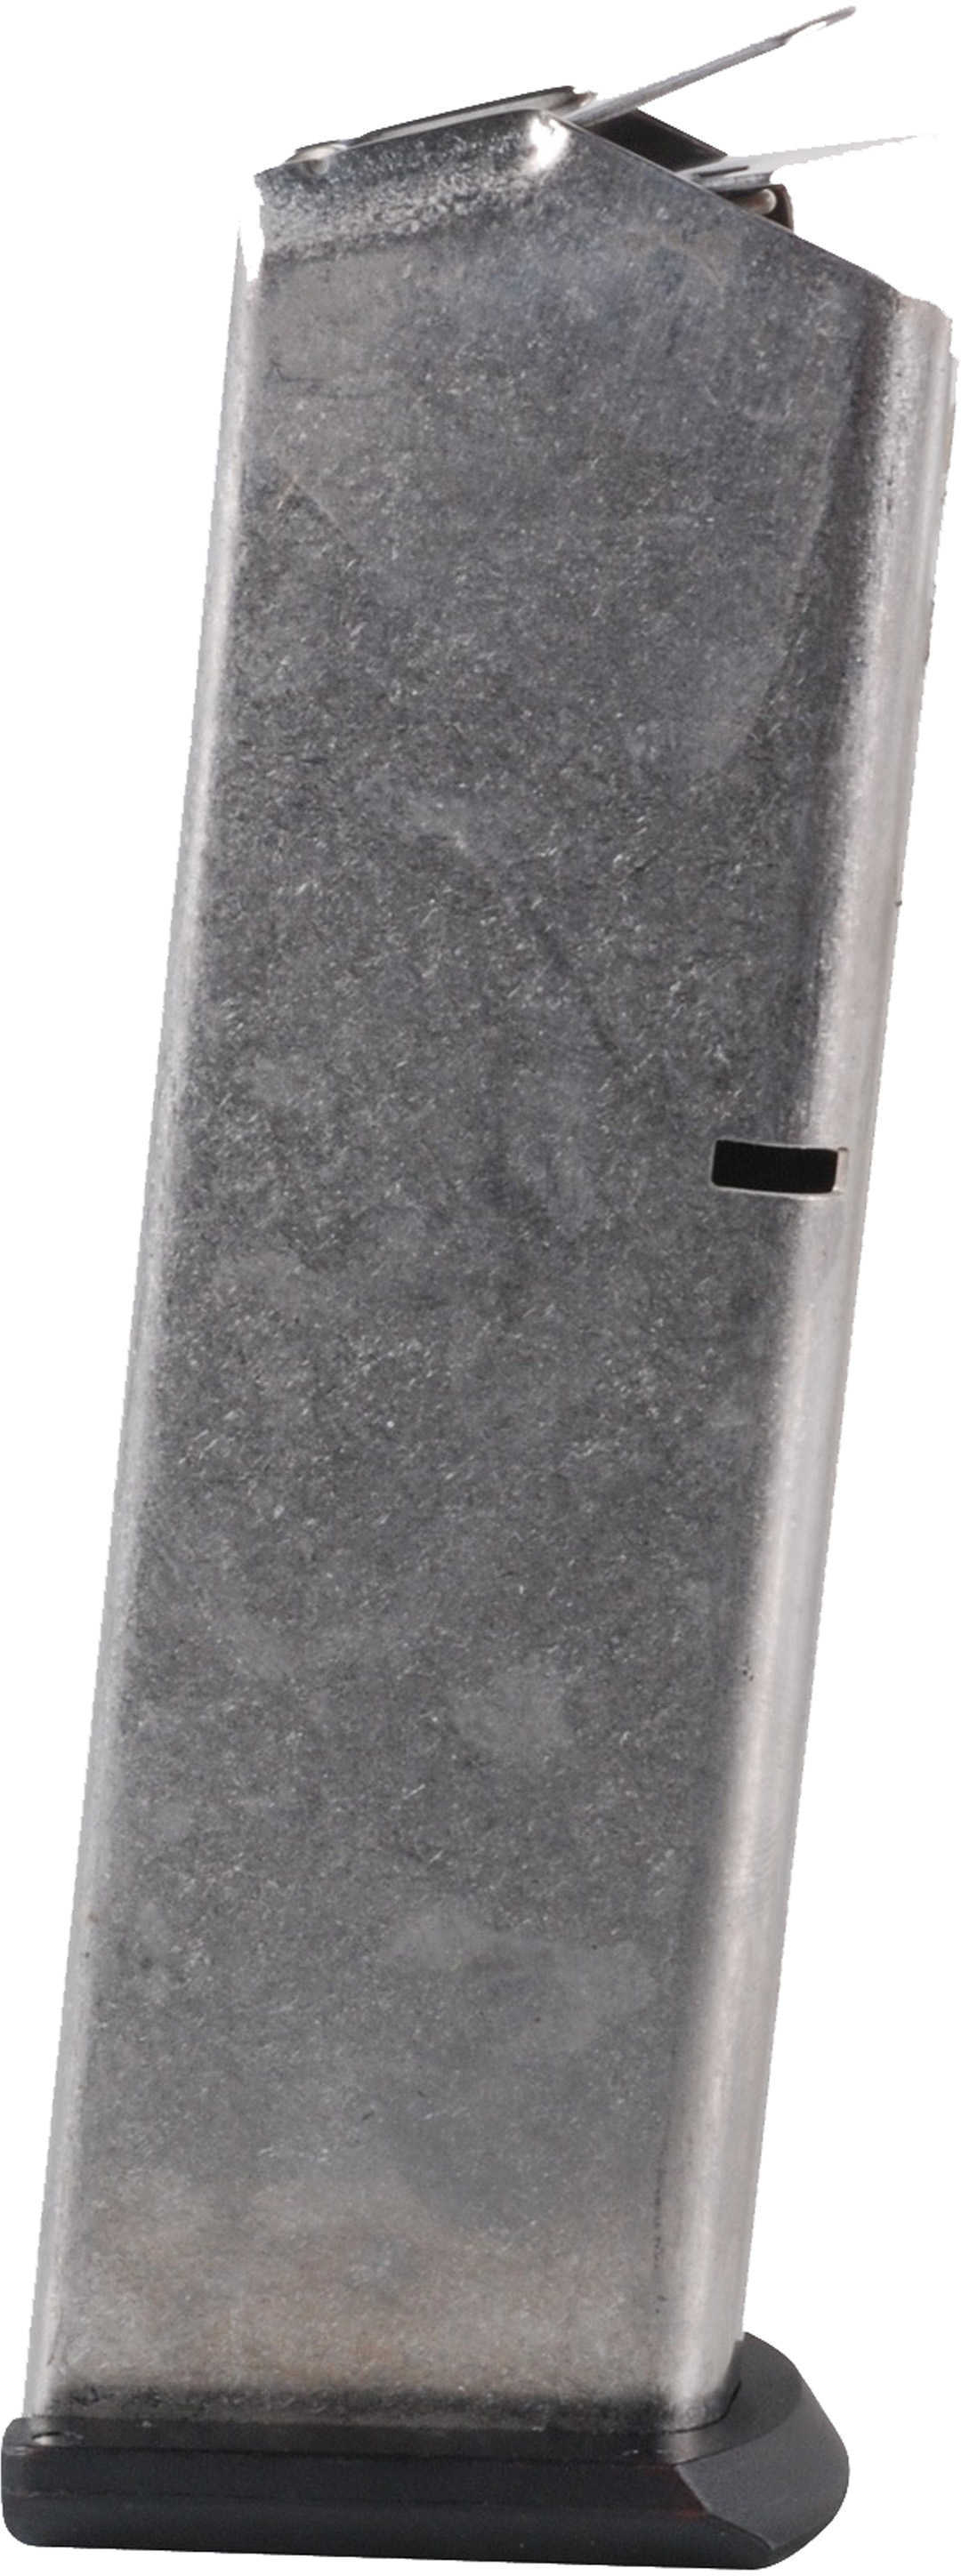 Ruger® Magazine 45 ACP 8Rd Stainless Fits P345 90230